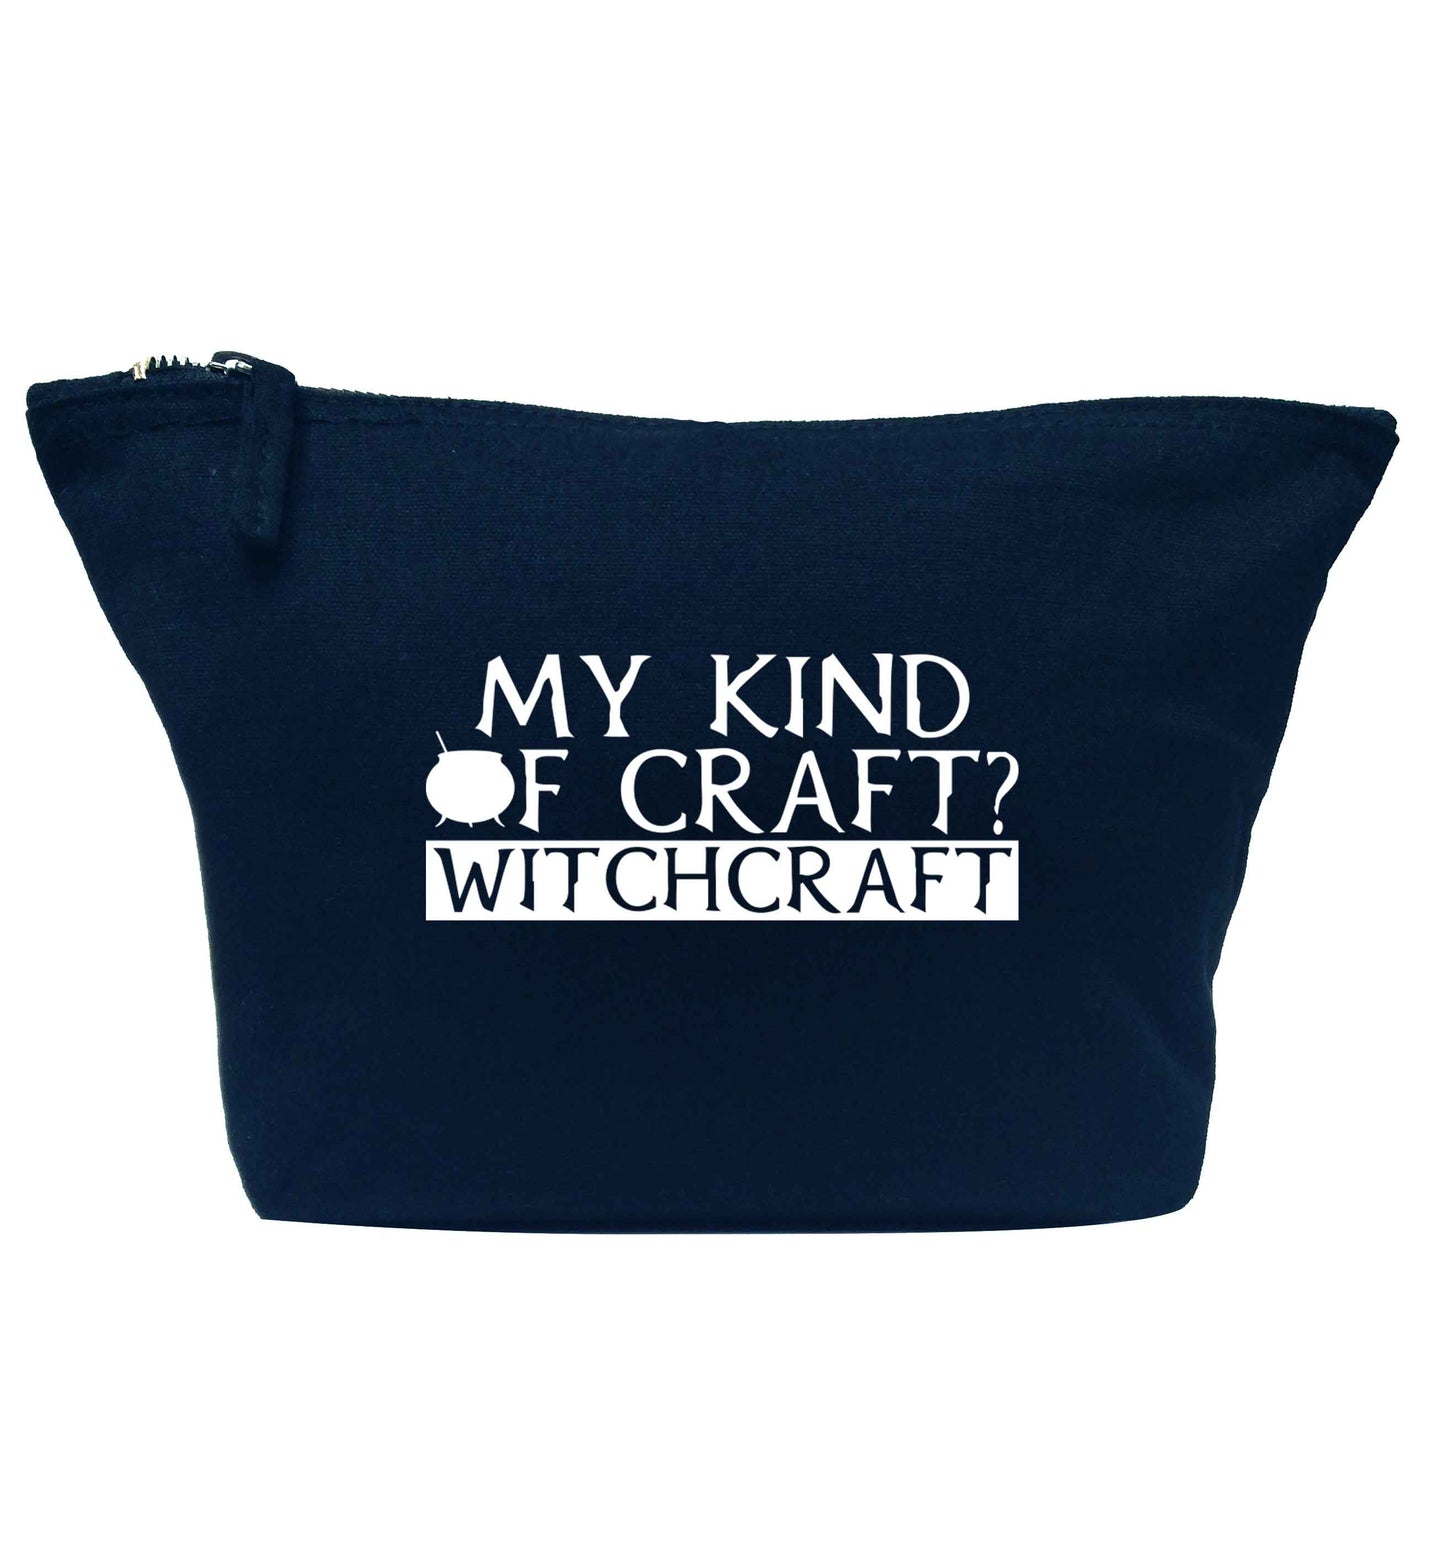 My king of craft? witchcraft  navy makeup bag